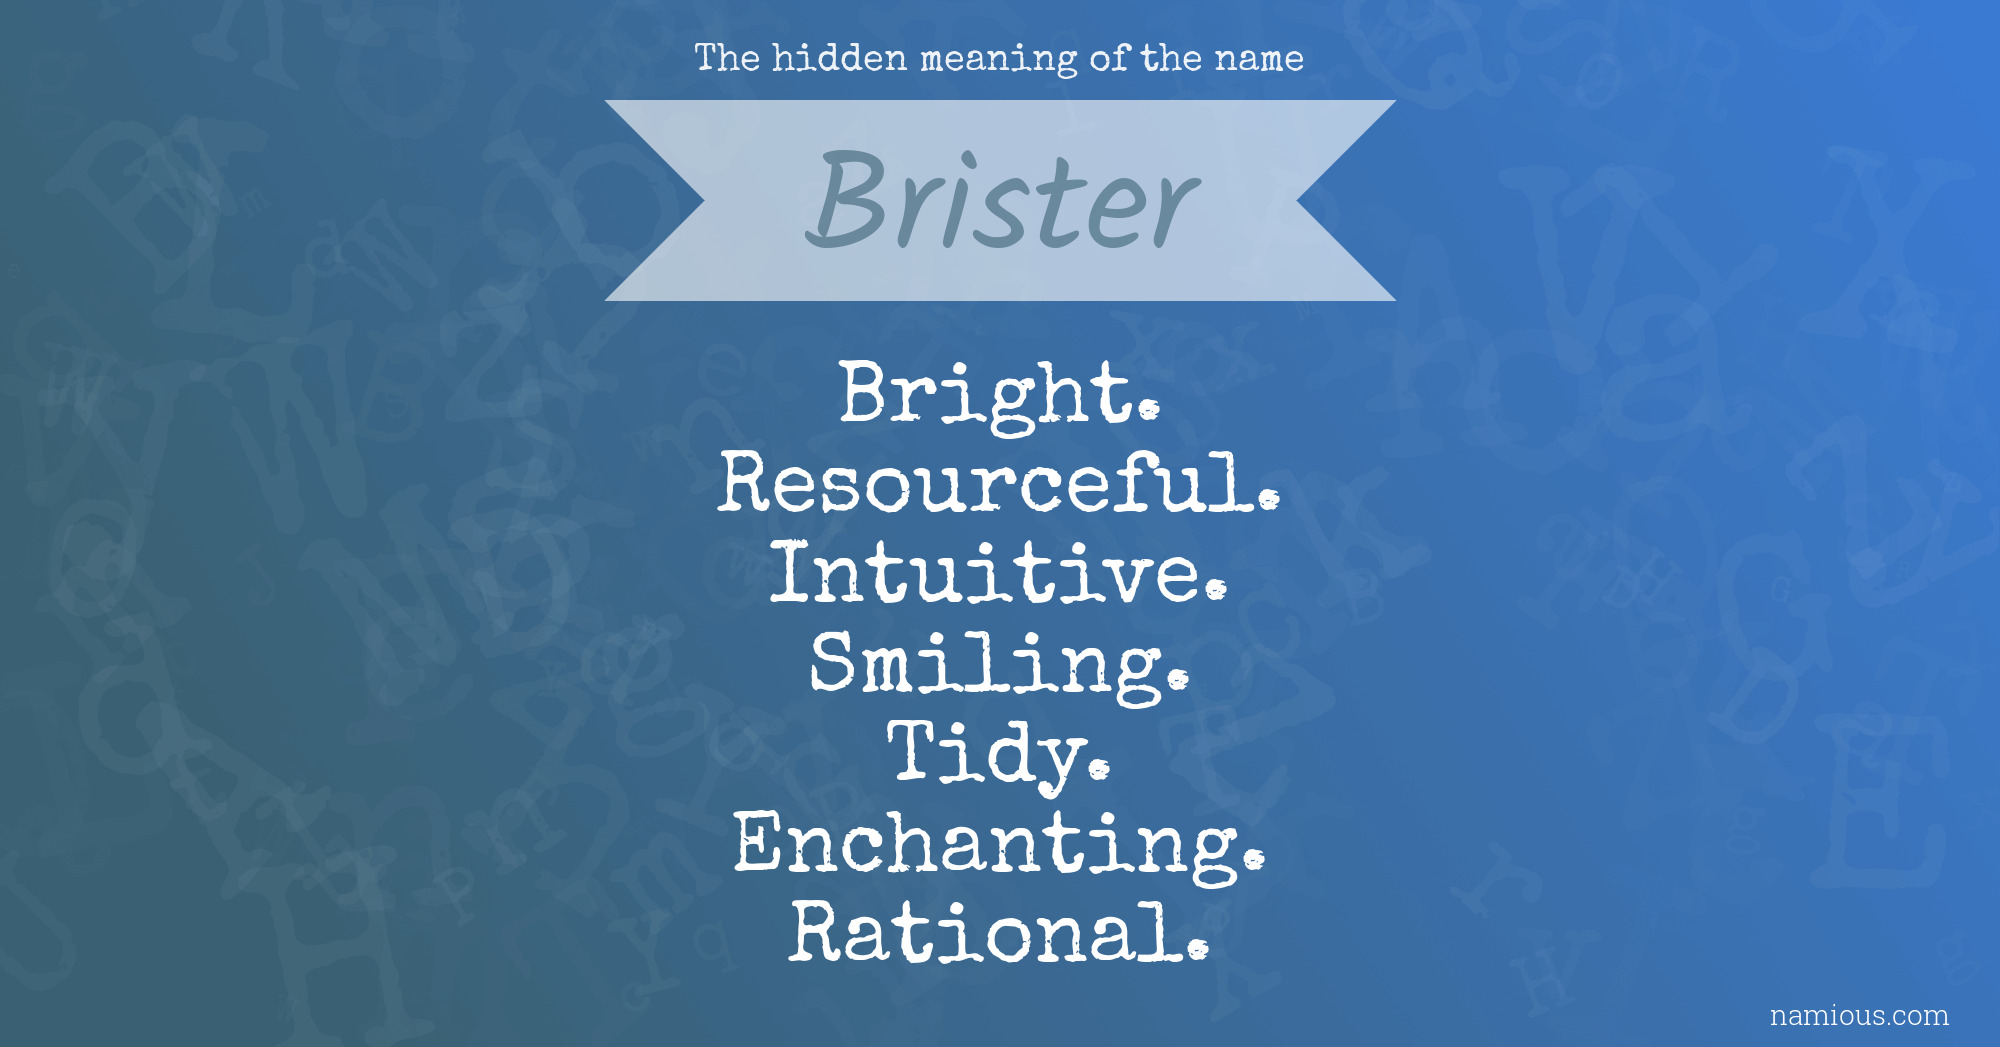 The hidden meaning of the name Brister